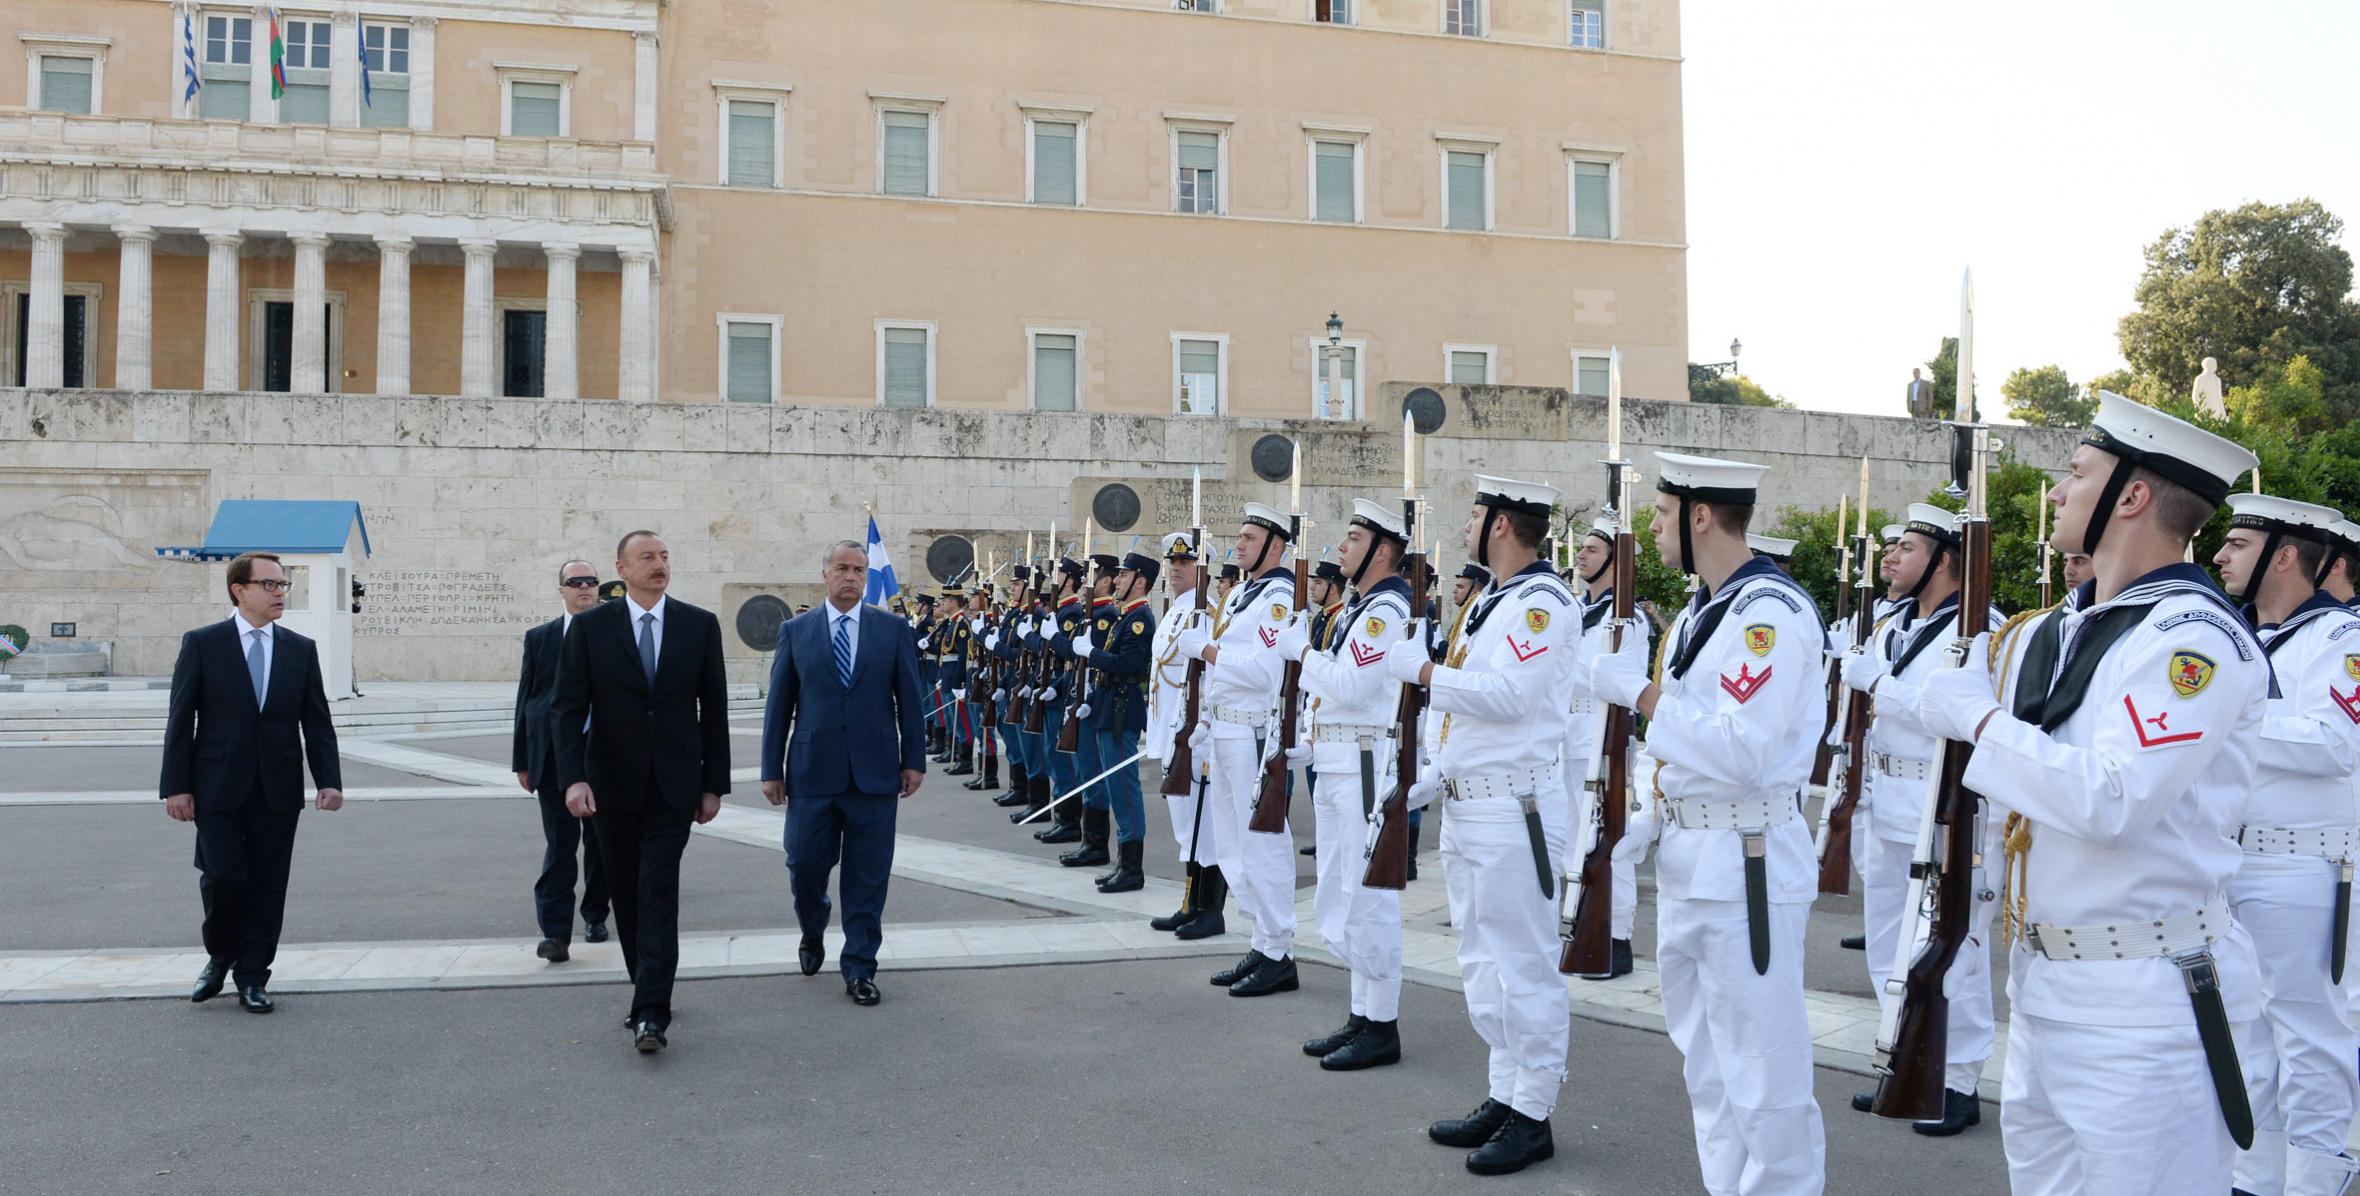 Ilham Aliyev visited the Tomb of the Unknown Soldier in Athen